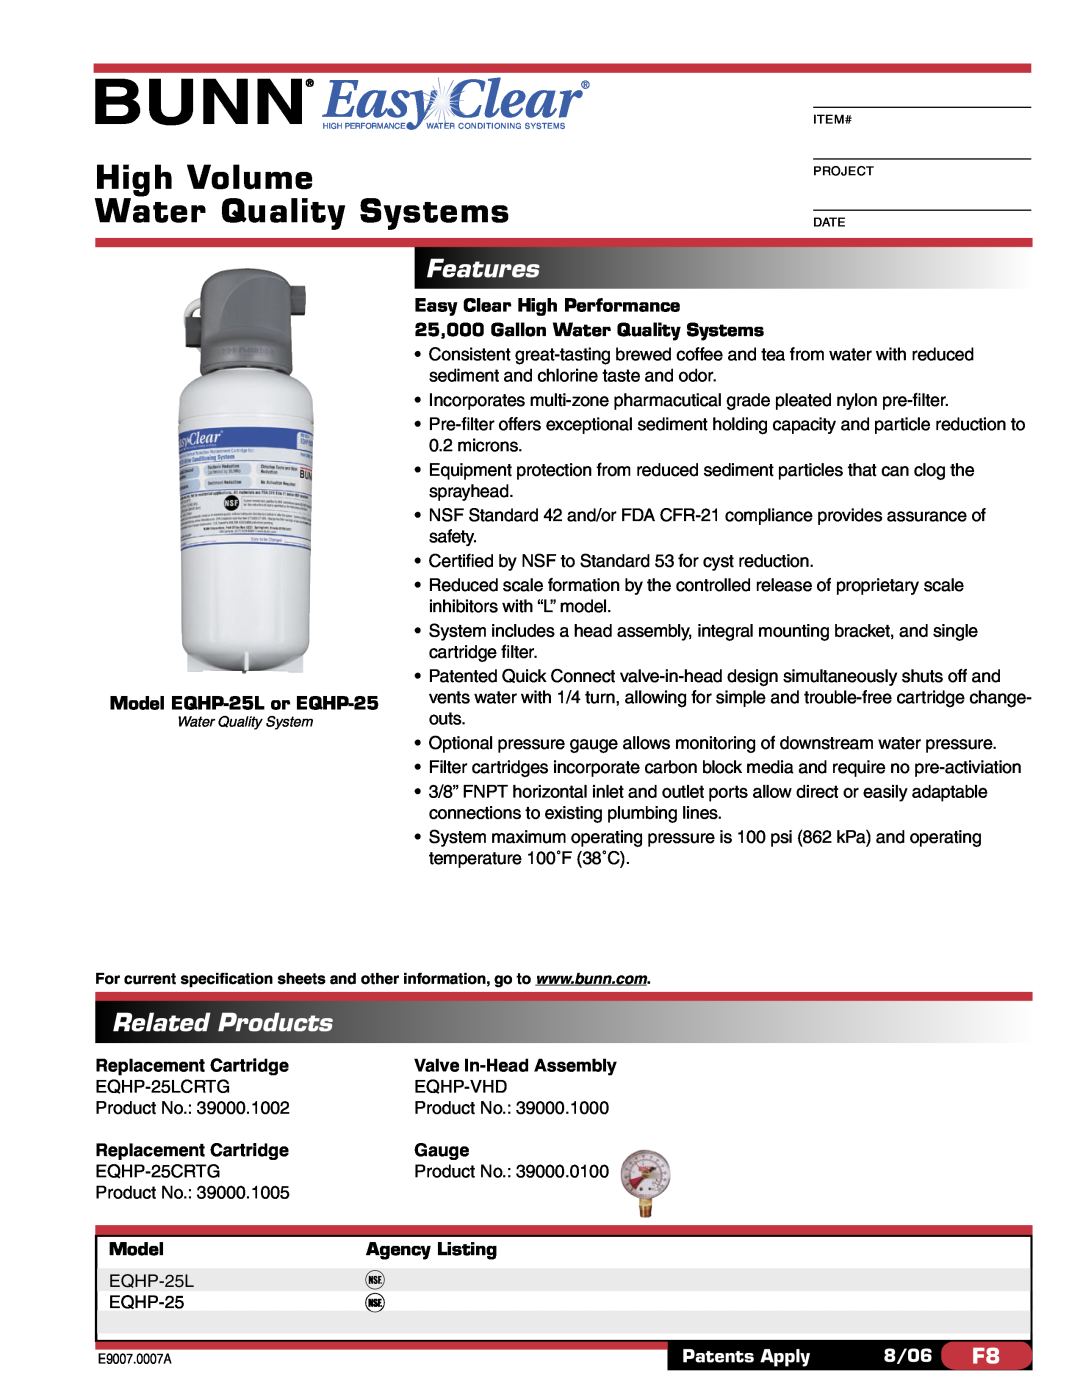 Bunn specifications High Volume, Water Quality Systems, Features, Related Products, Model EQHP-25Lor EQHP-25, Gauge 